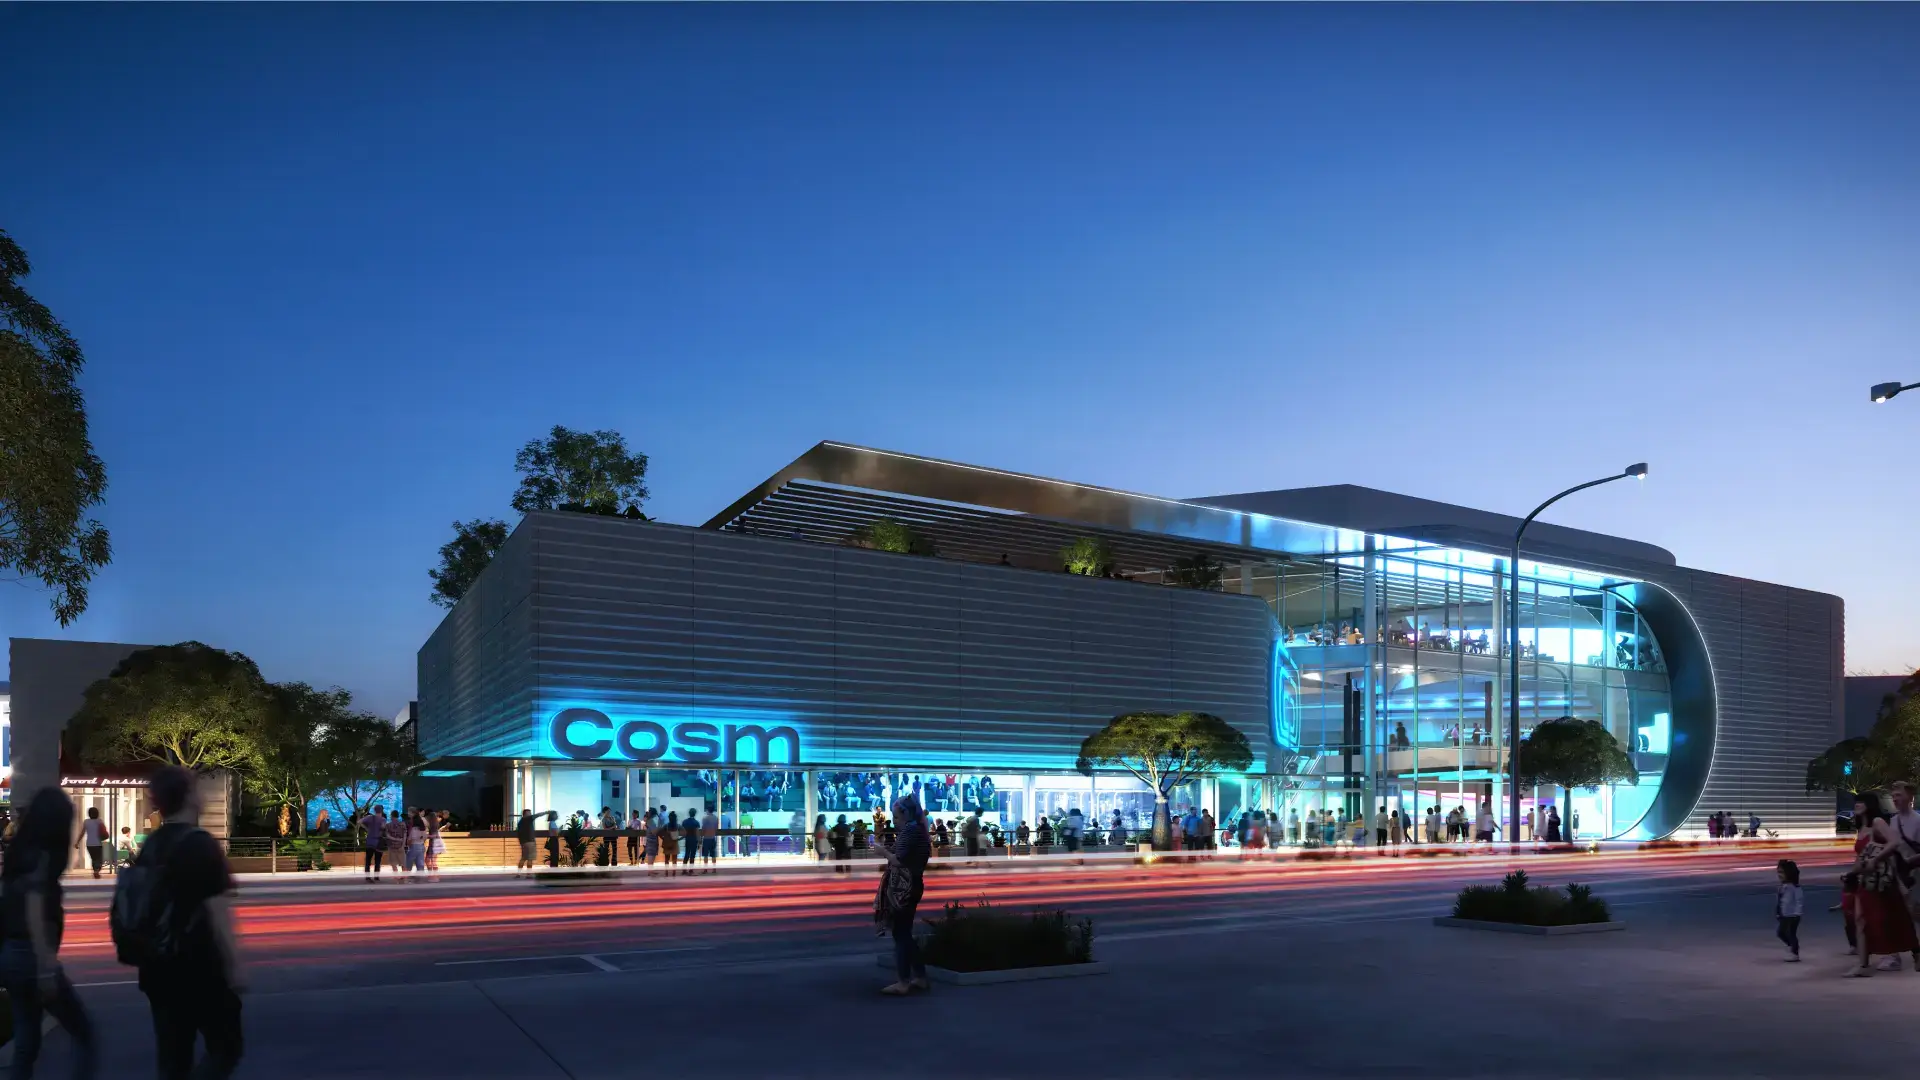 nighttime rendering of an entertainment venue